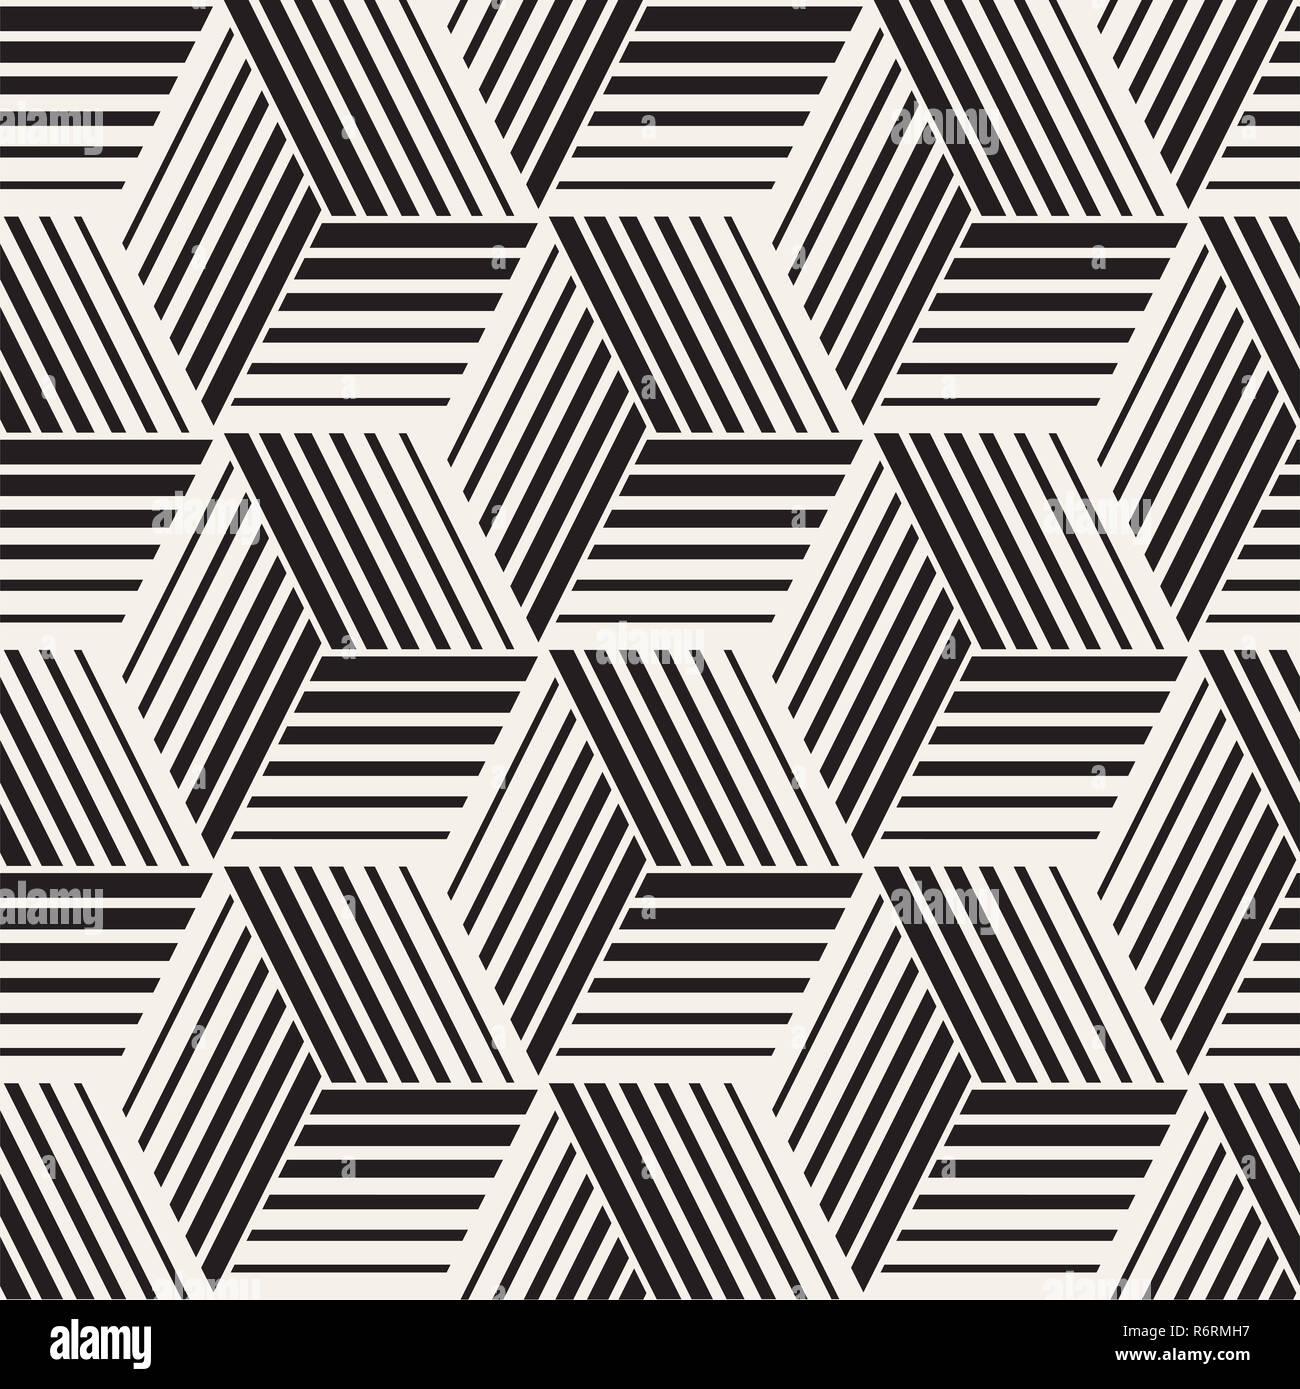 Seamless Pattern With Lines Lattice Vector Abstract Geometric Background Stylish Structure Stock Photo Alamy